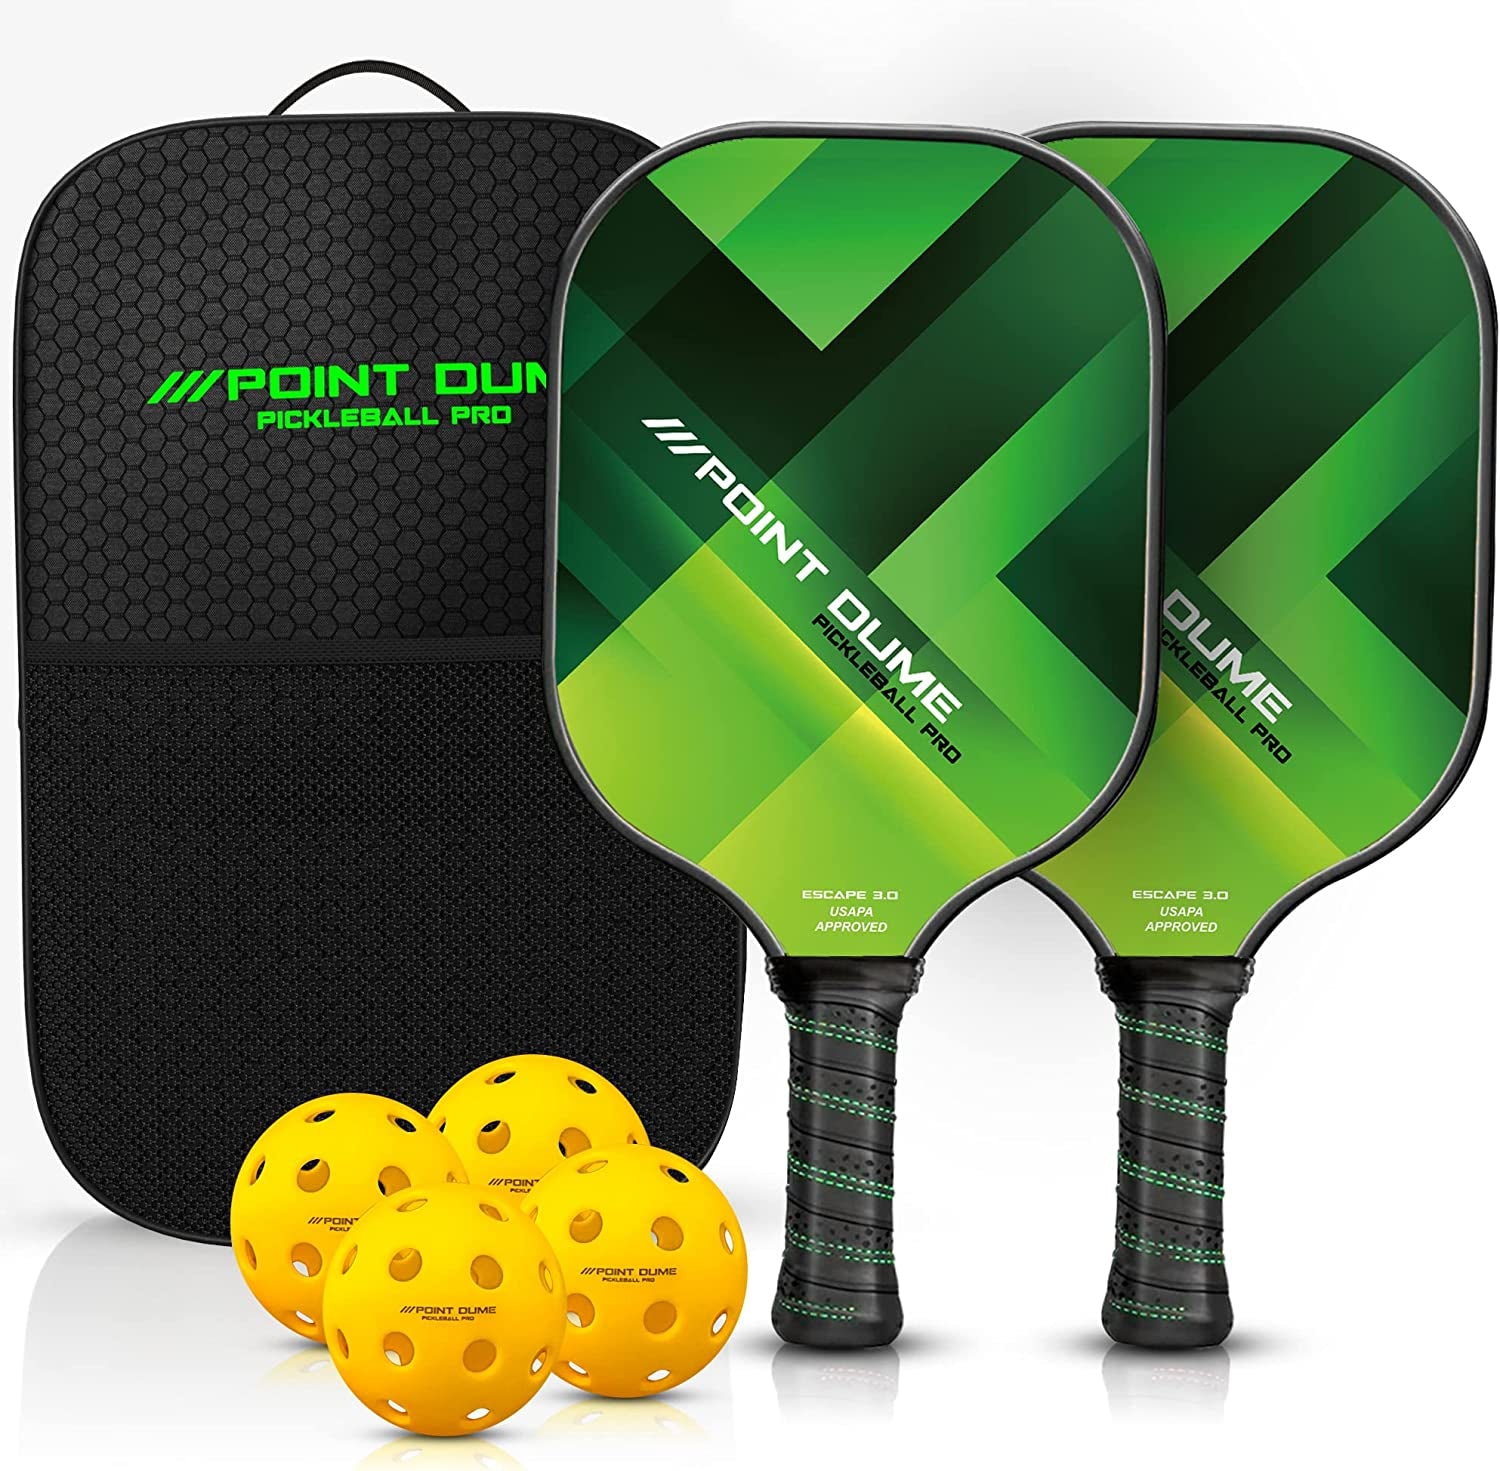 "Unleash Your Pickleball Power: Complete Set with High-Performance Graphite Carbon Paddle, 4 Pickleballs, Carry Case, and USAPA Approval"